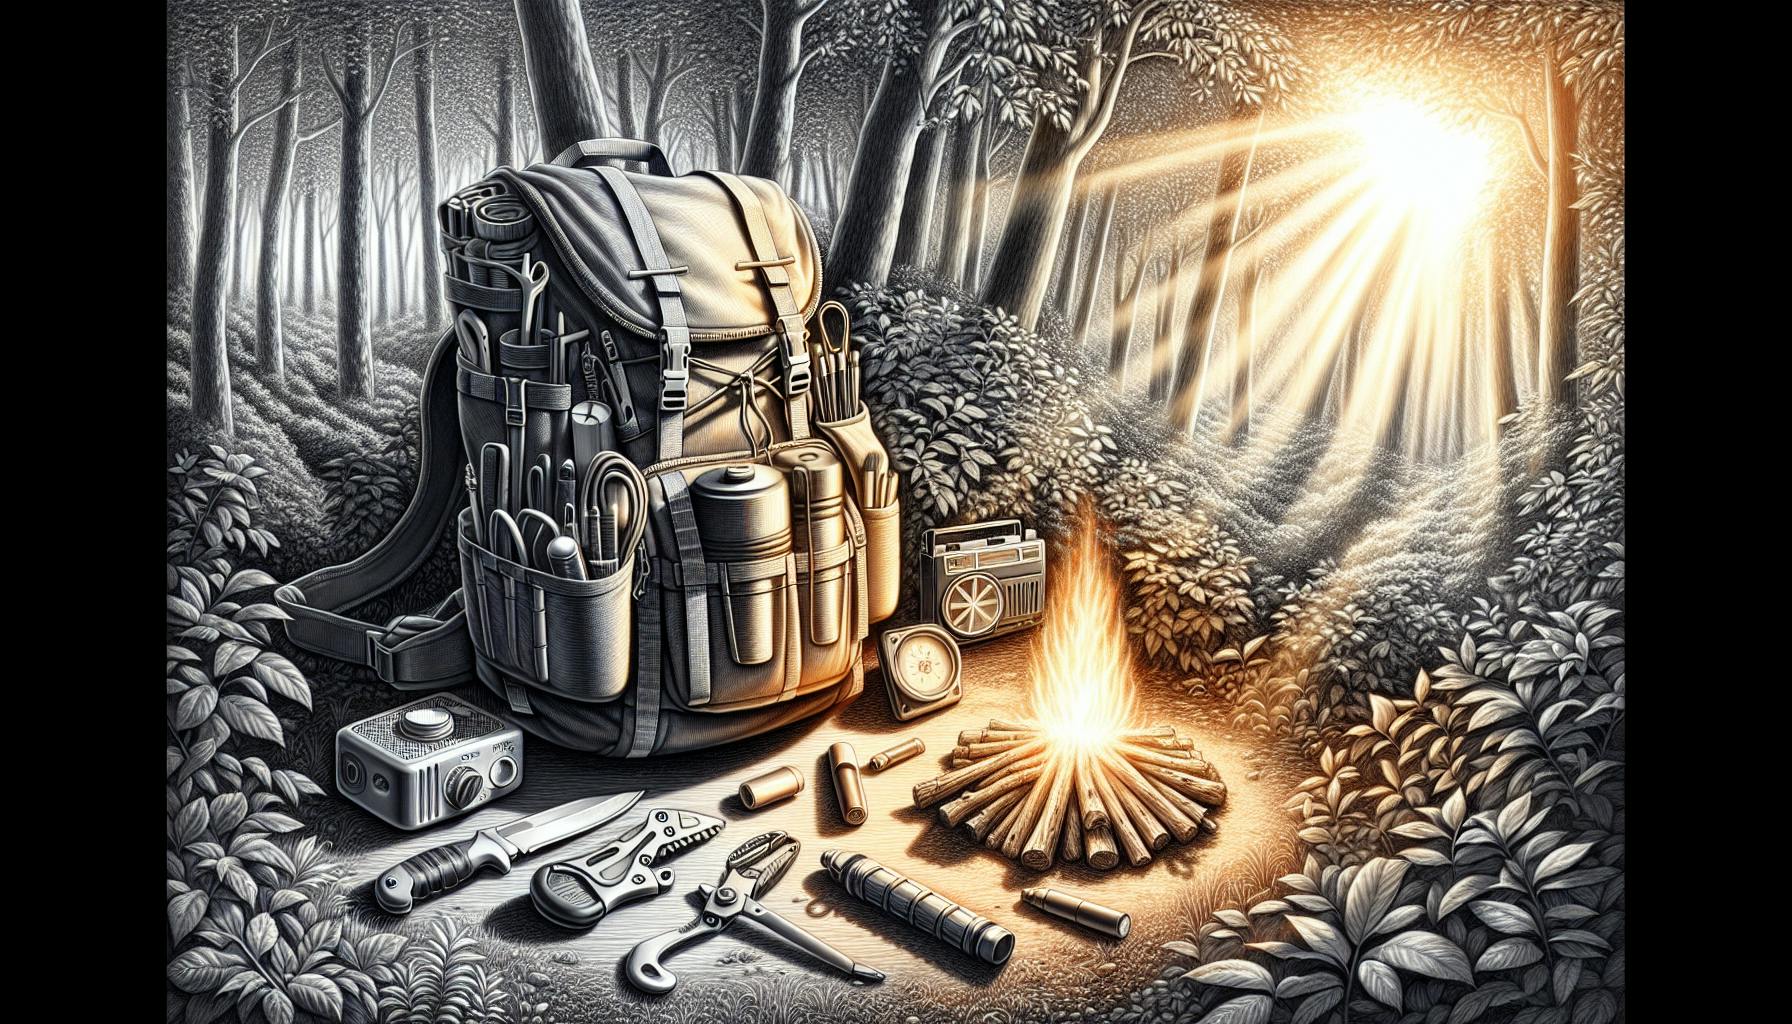 Best Survival Tools for Emergency Readiness